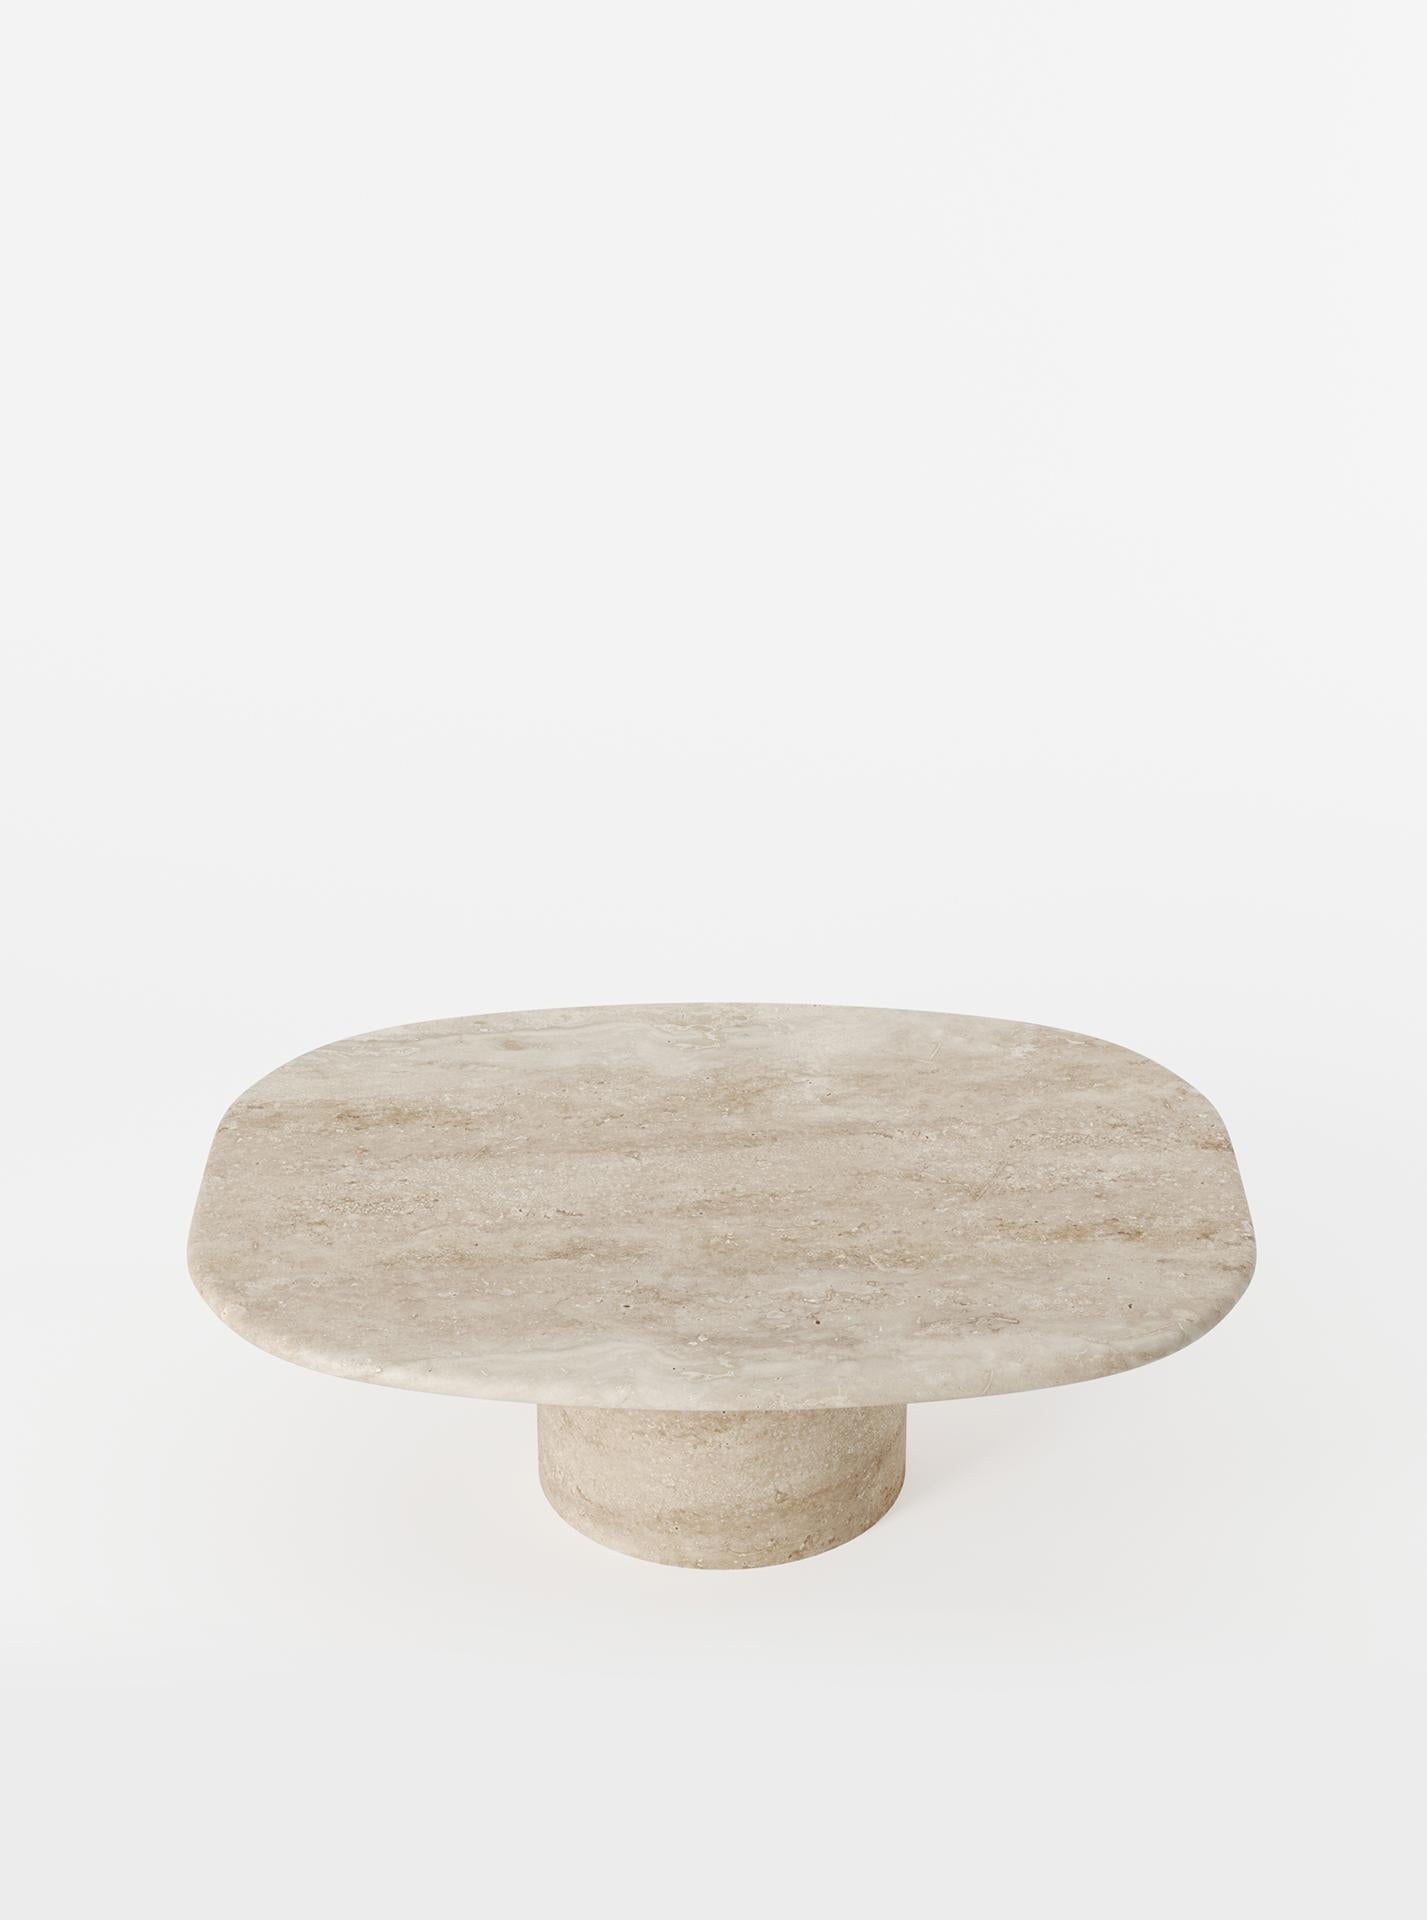 Minimalist Circa Coffee Table made in Italy in Travertine. Designed by Yaniv Chen For Sale